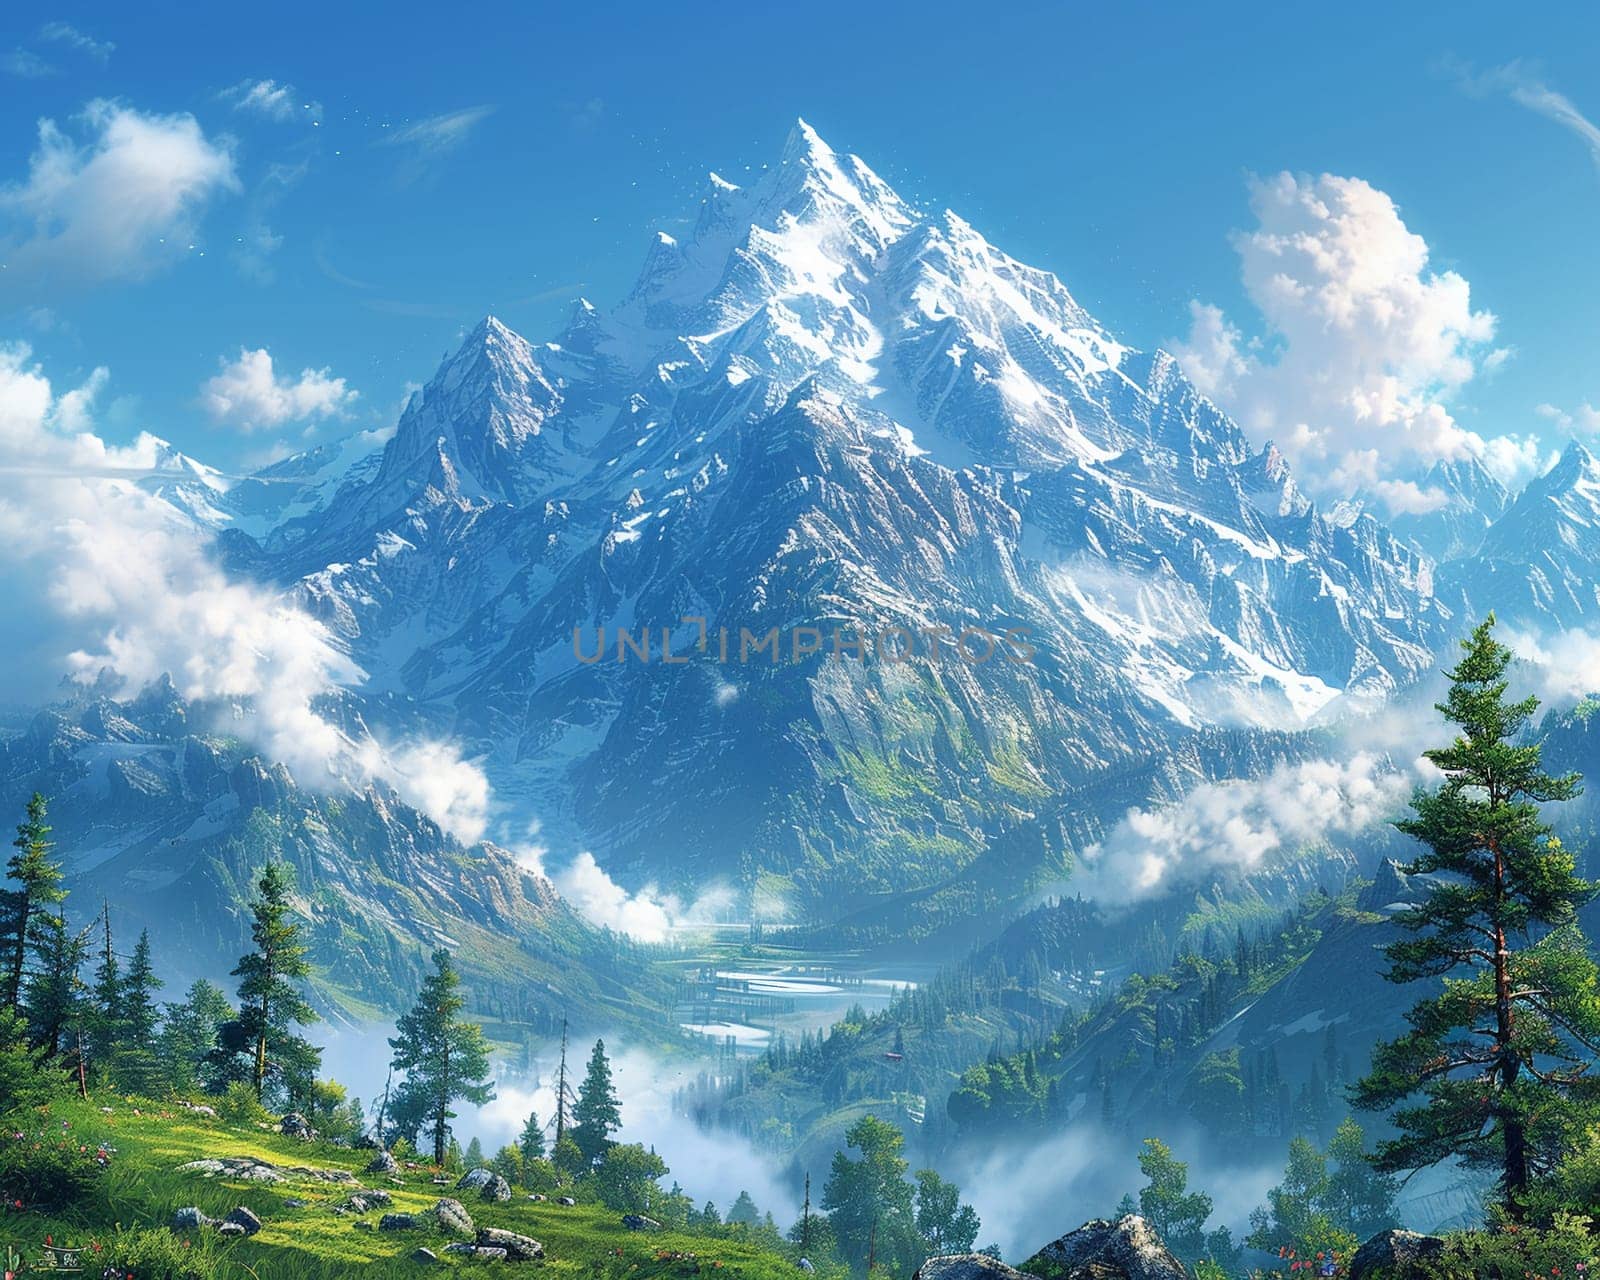 Nature wallpapers with a breathtaking mountain landscape, ideal for inspiration and desktop backgrounds.